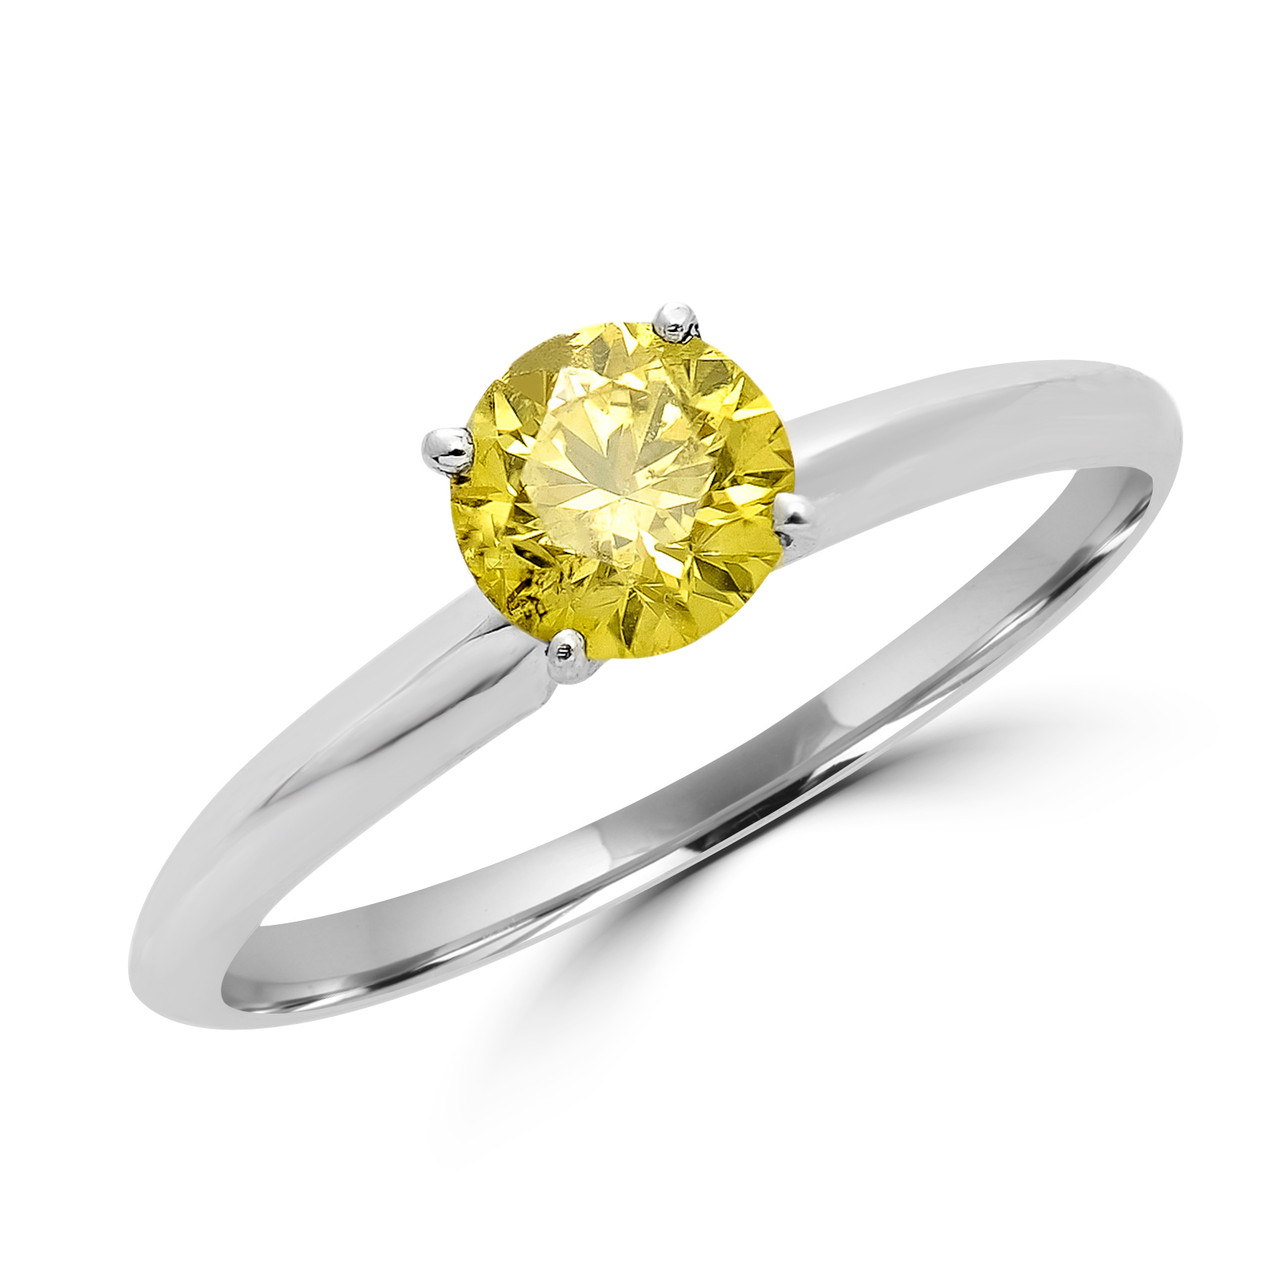 Gold And 16.10ct Fancy Yellow Diamond Ring Available For Immediate Sale At  Sotheby's